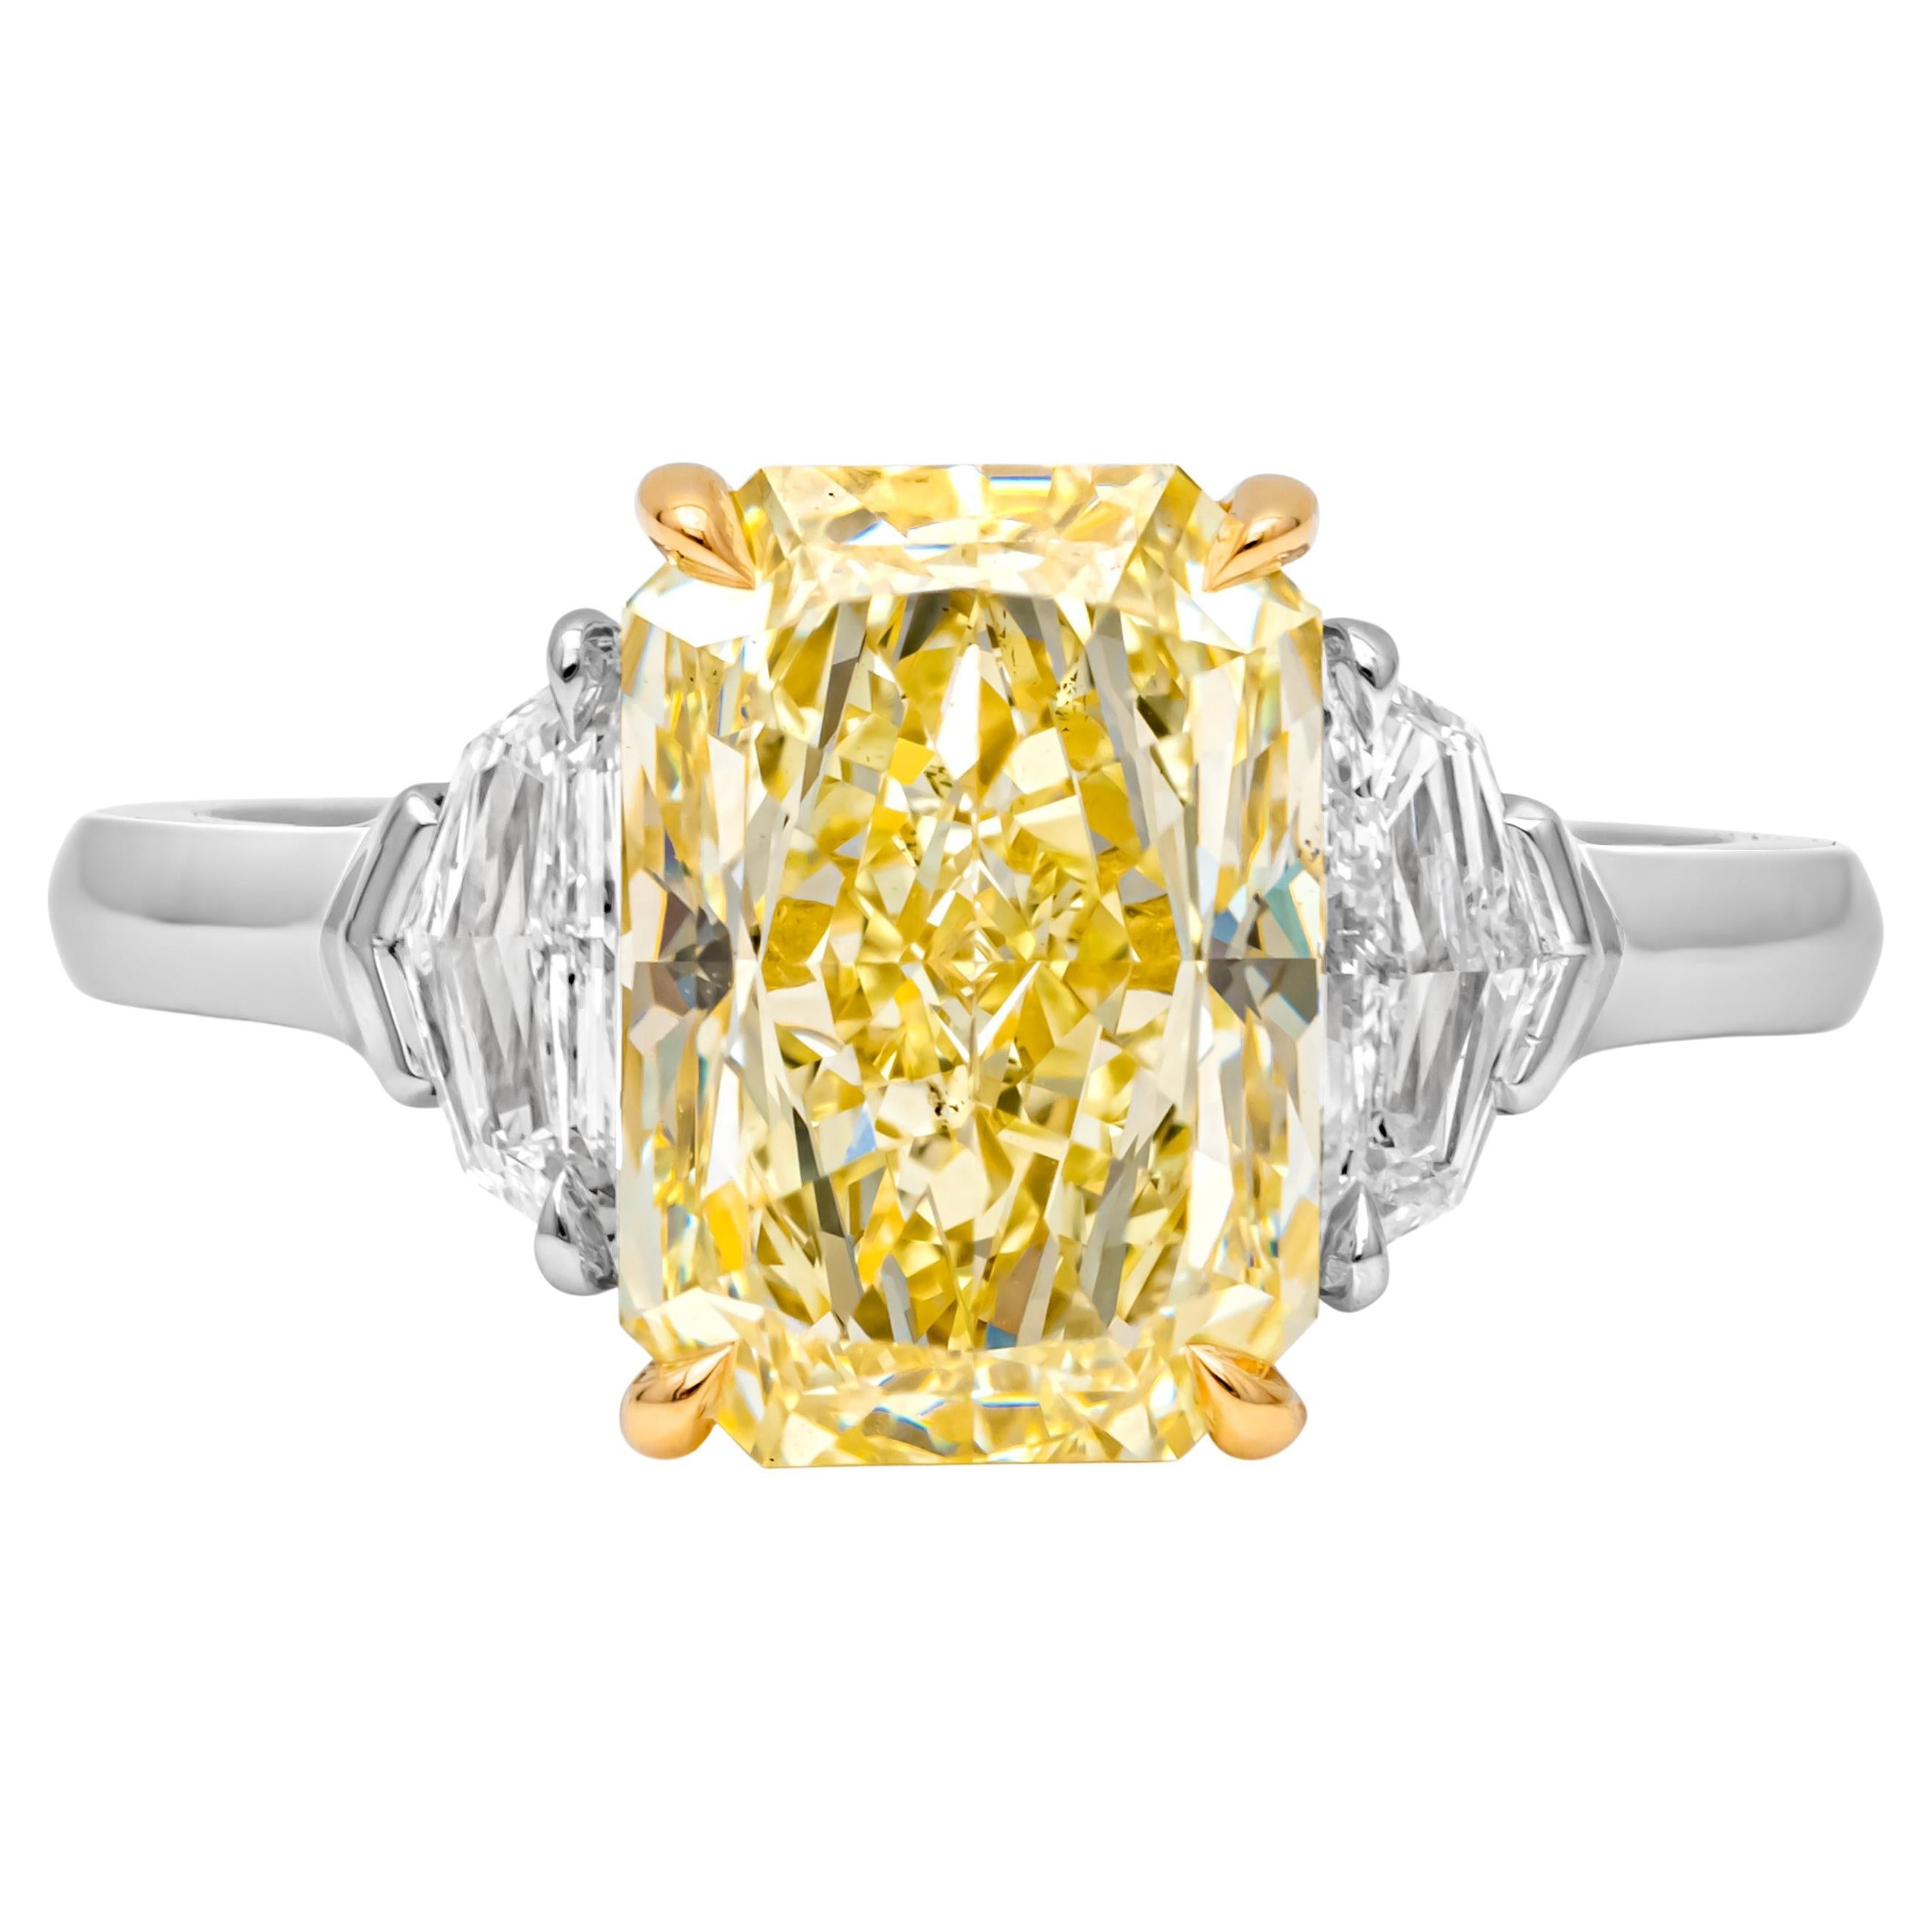 GIA Certified 4.02 Carats Radiant Cut Yellow Diamond Ring For Sale